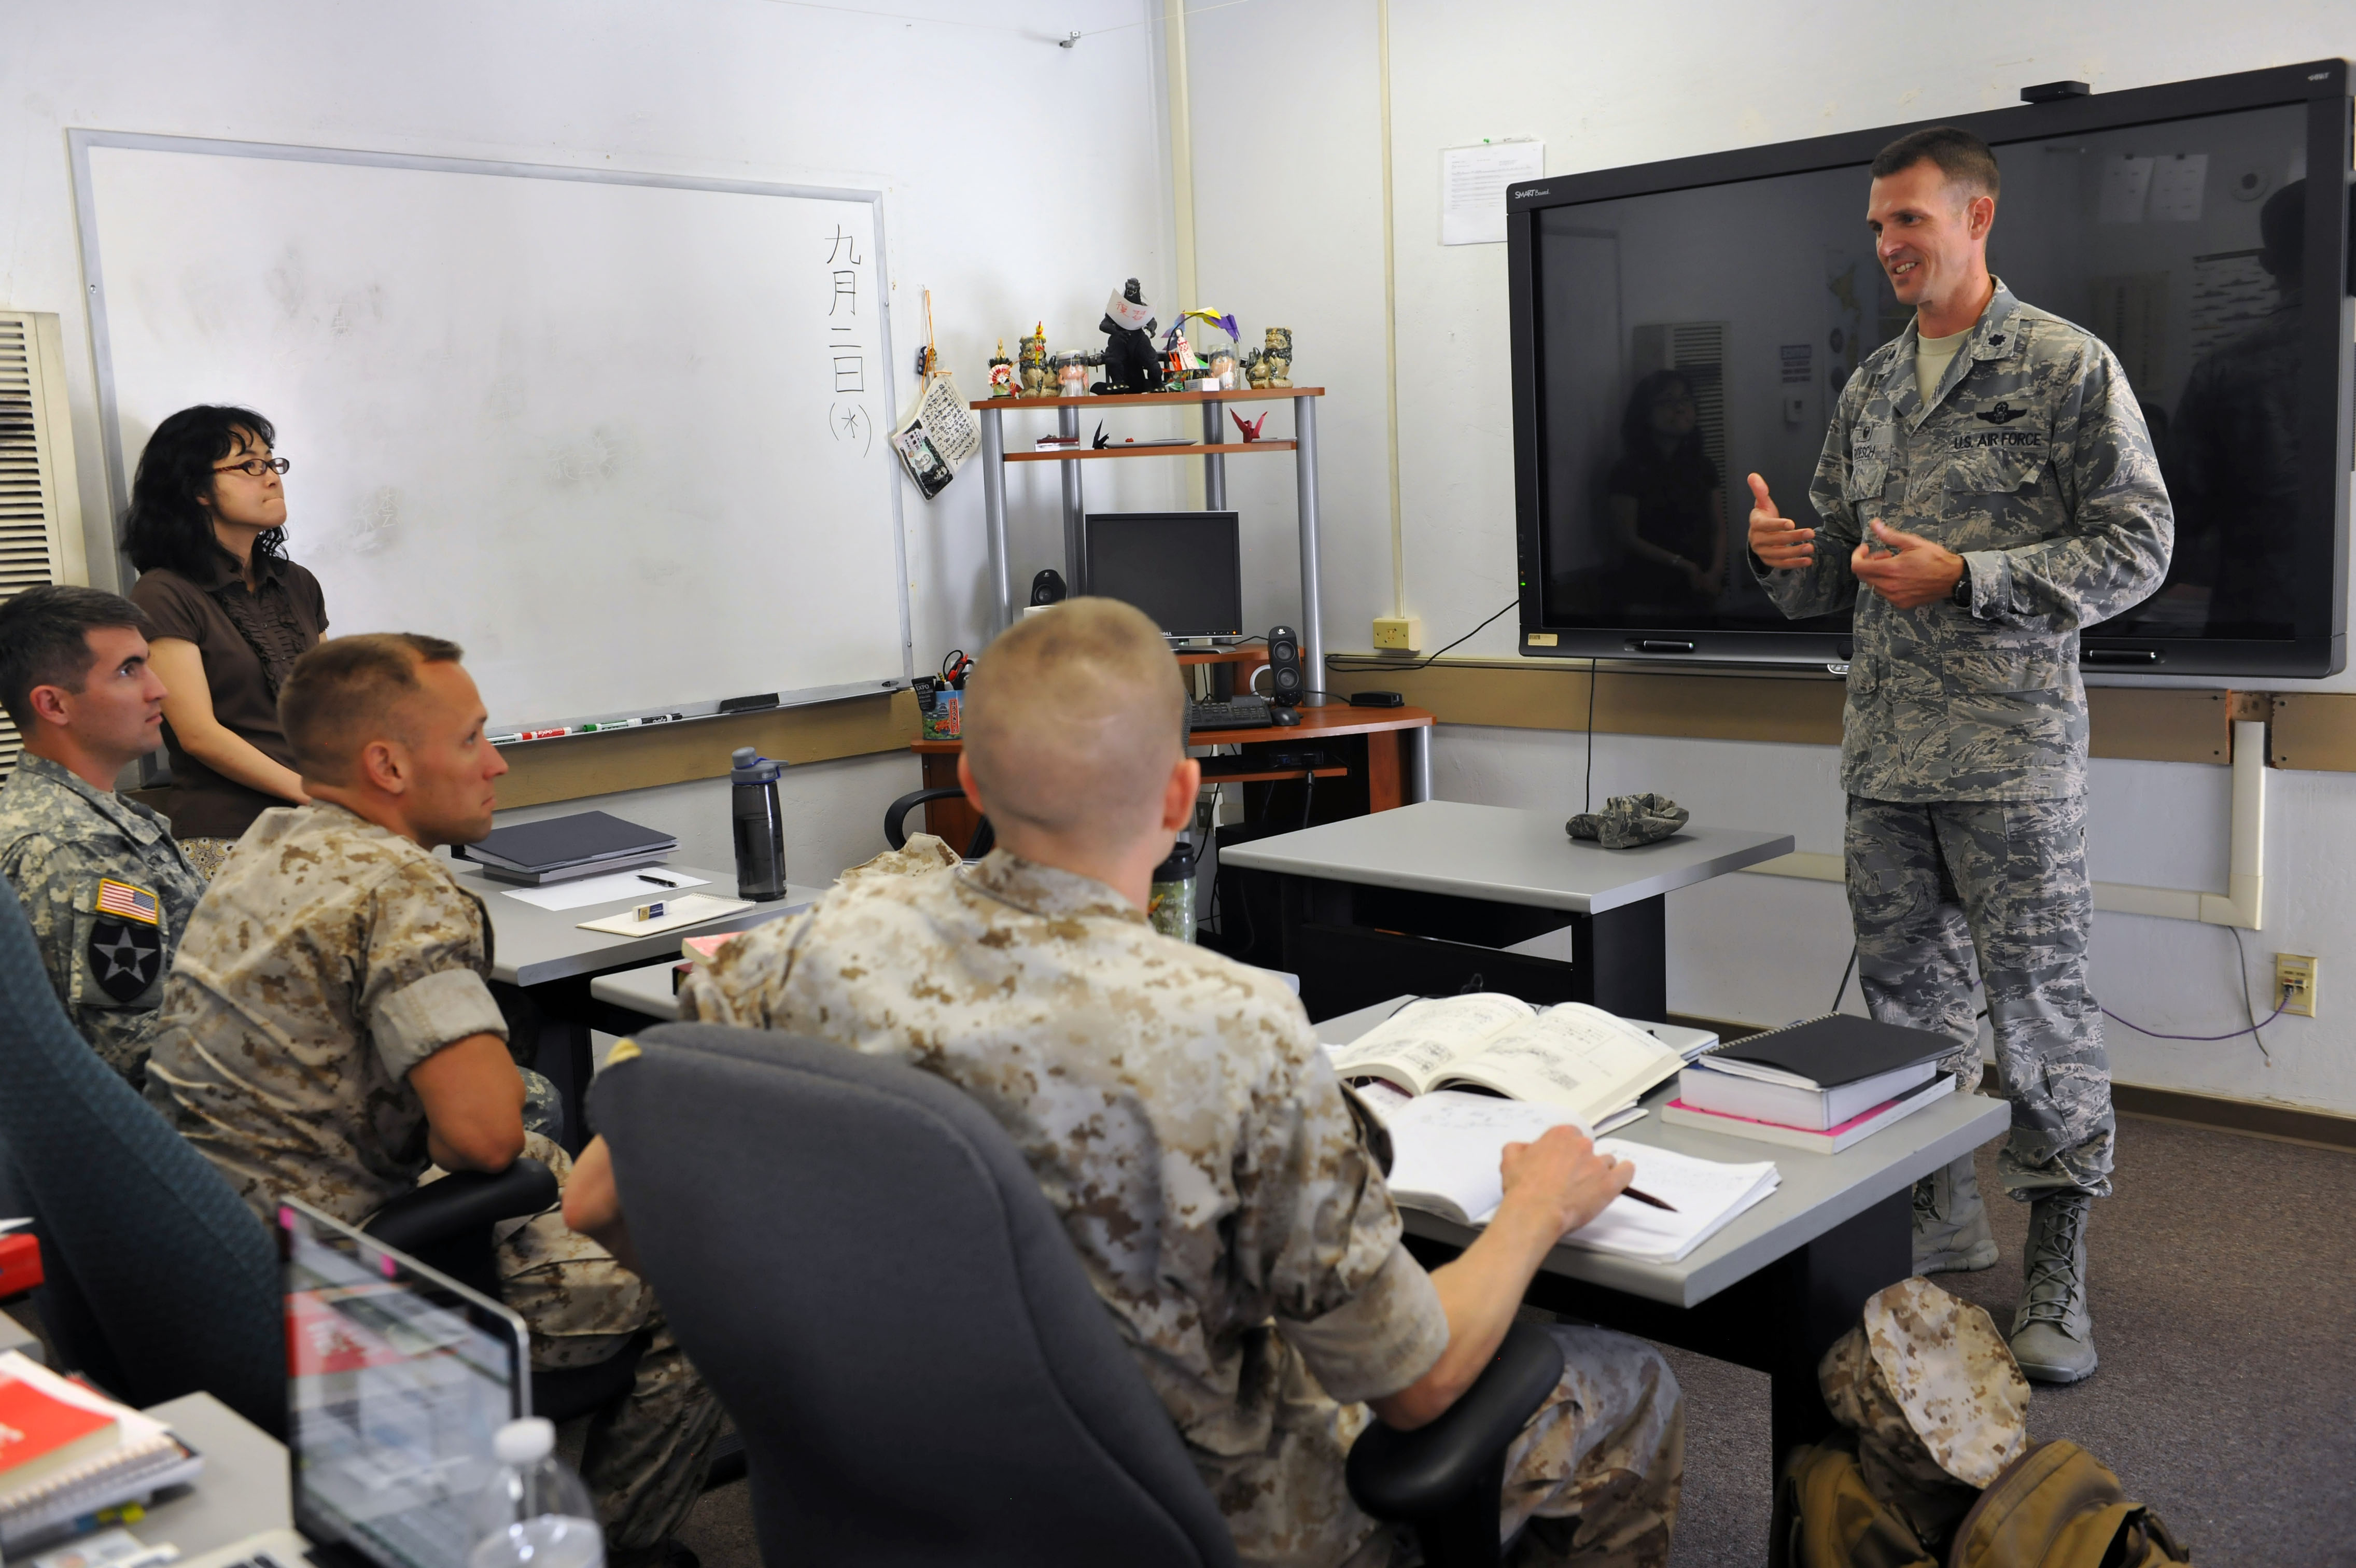 Air Force Special Operations School commandant learns about DLIFLC